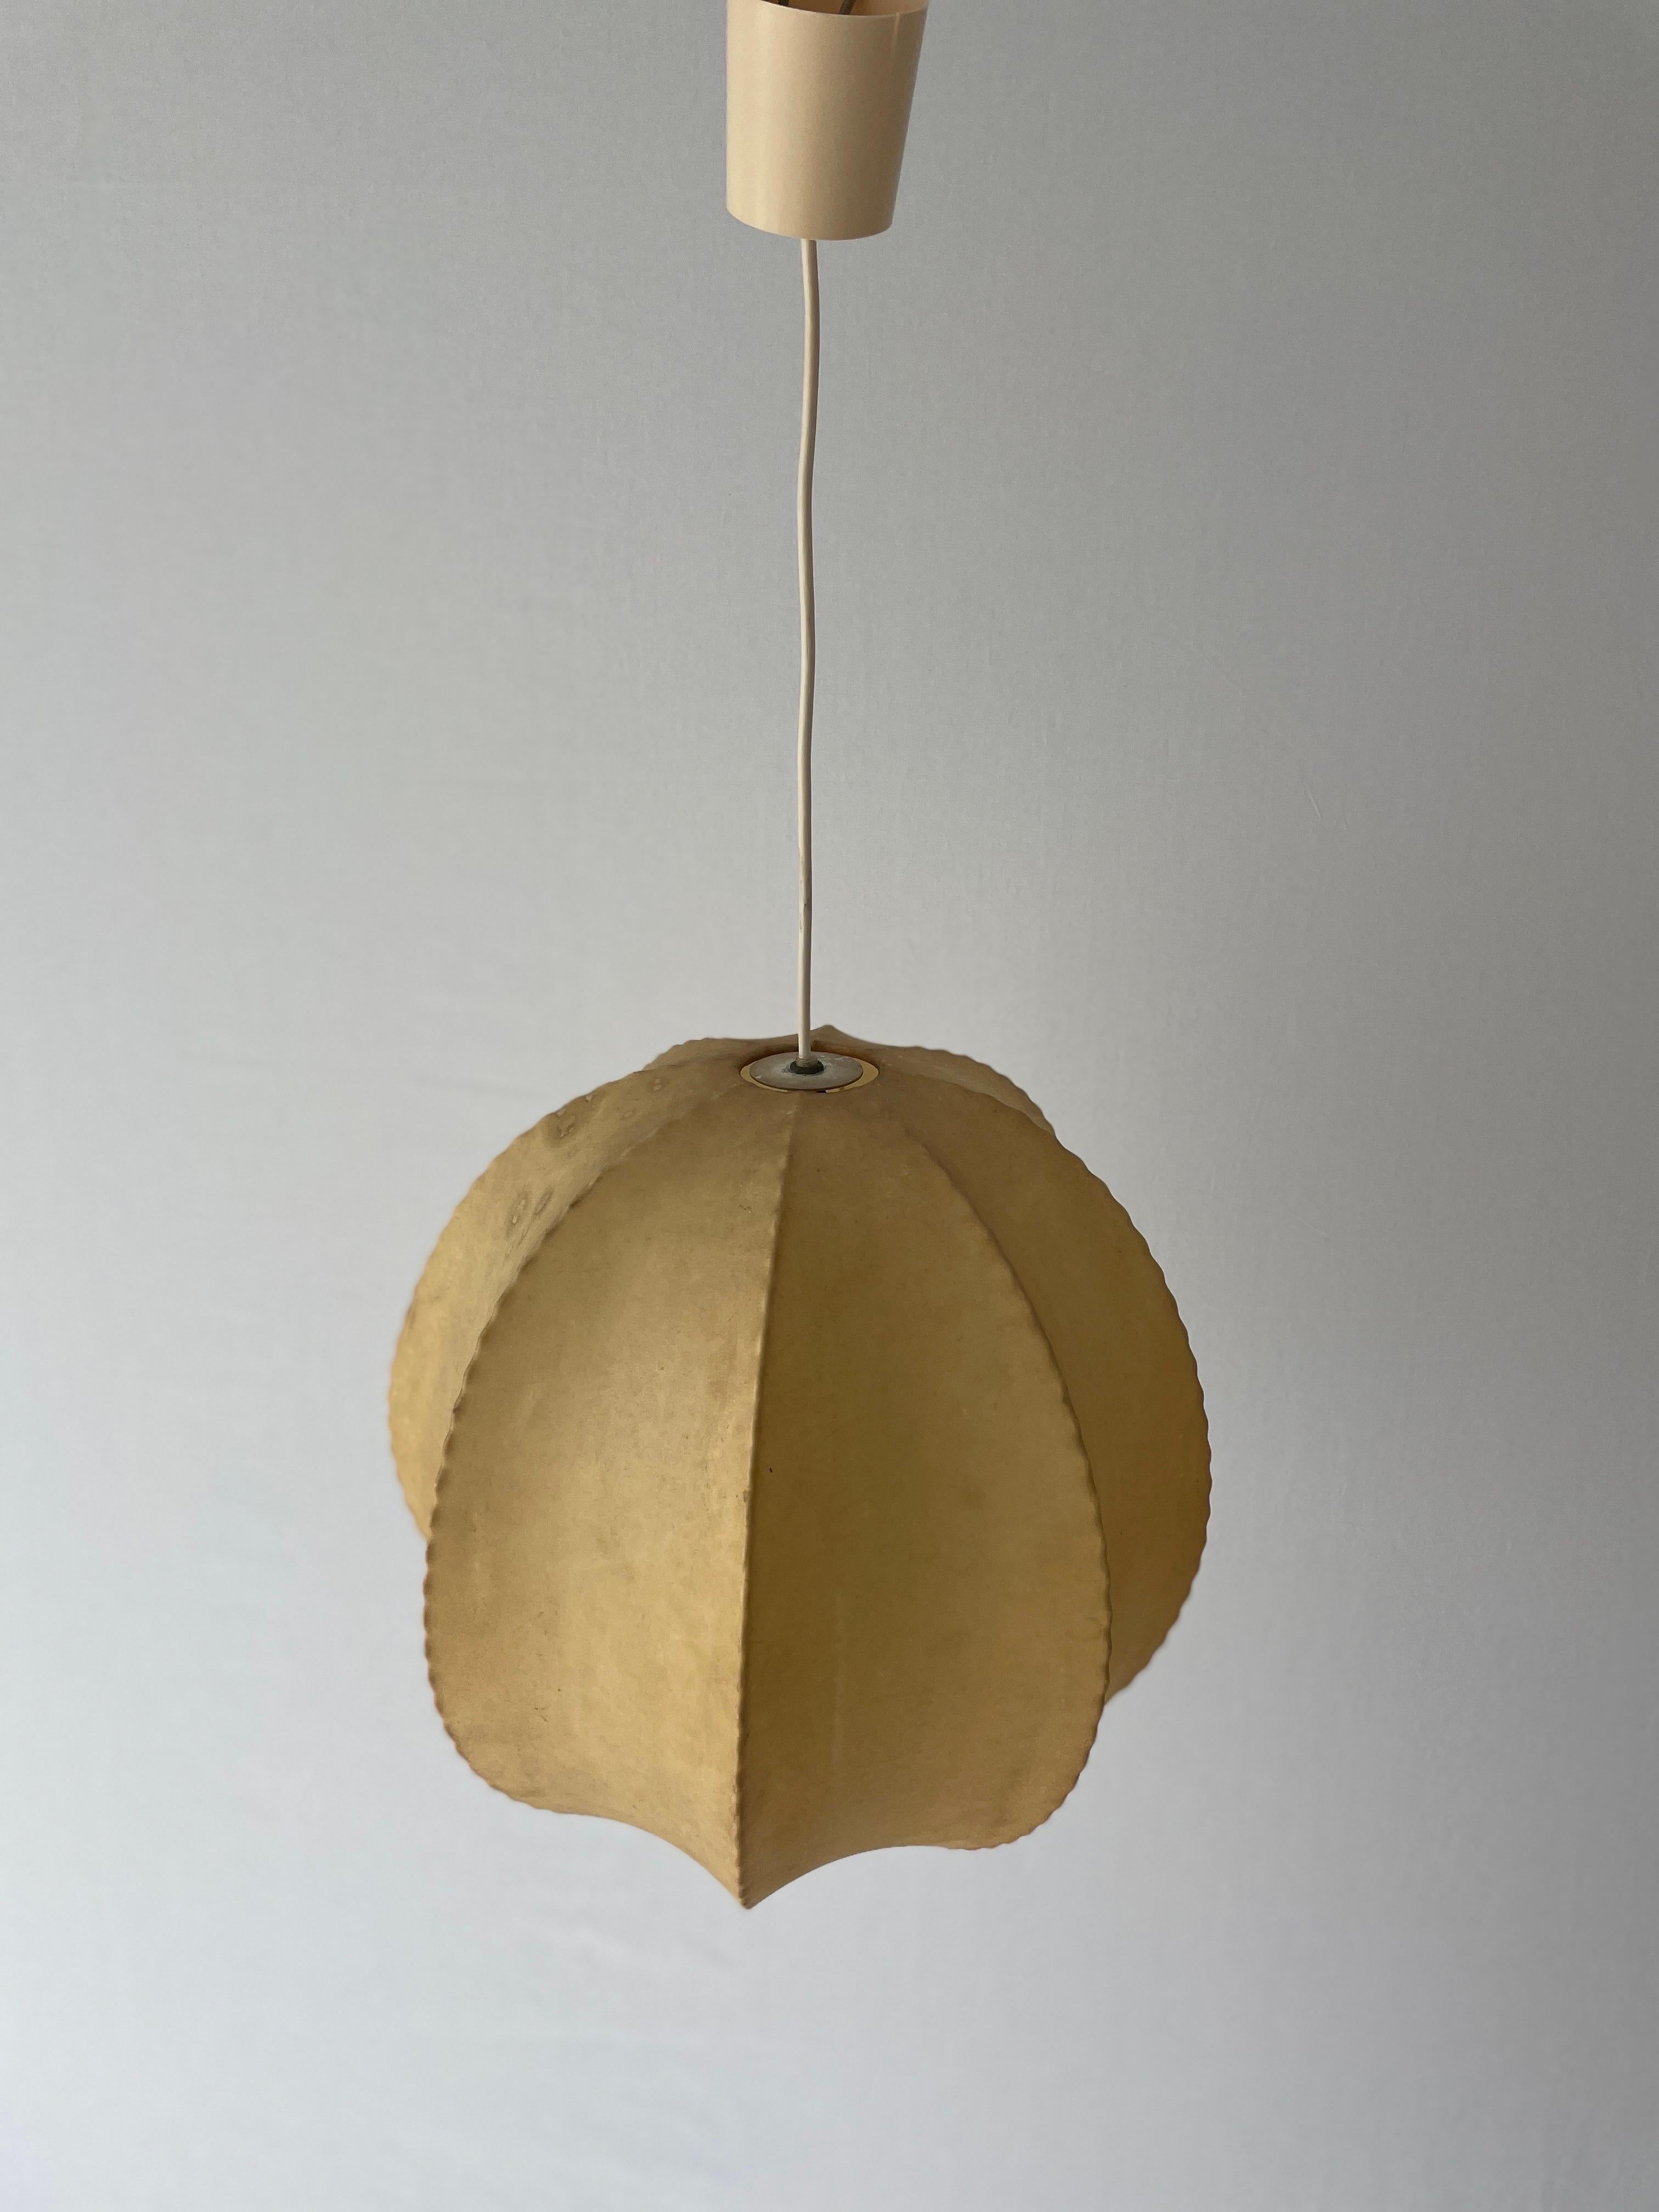 Cocoon Ball Design Pendant Lamp, 1960s, Italy For Sale 3